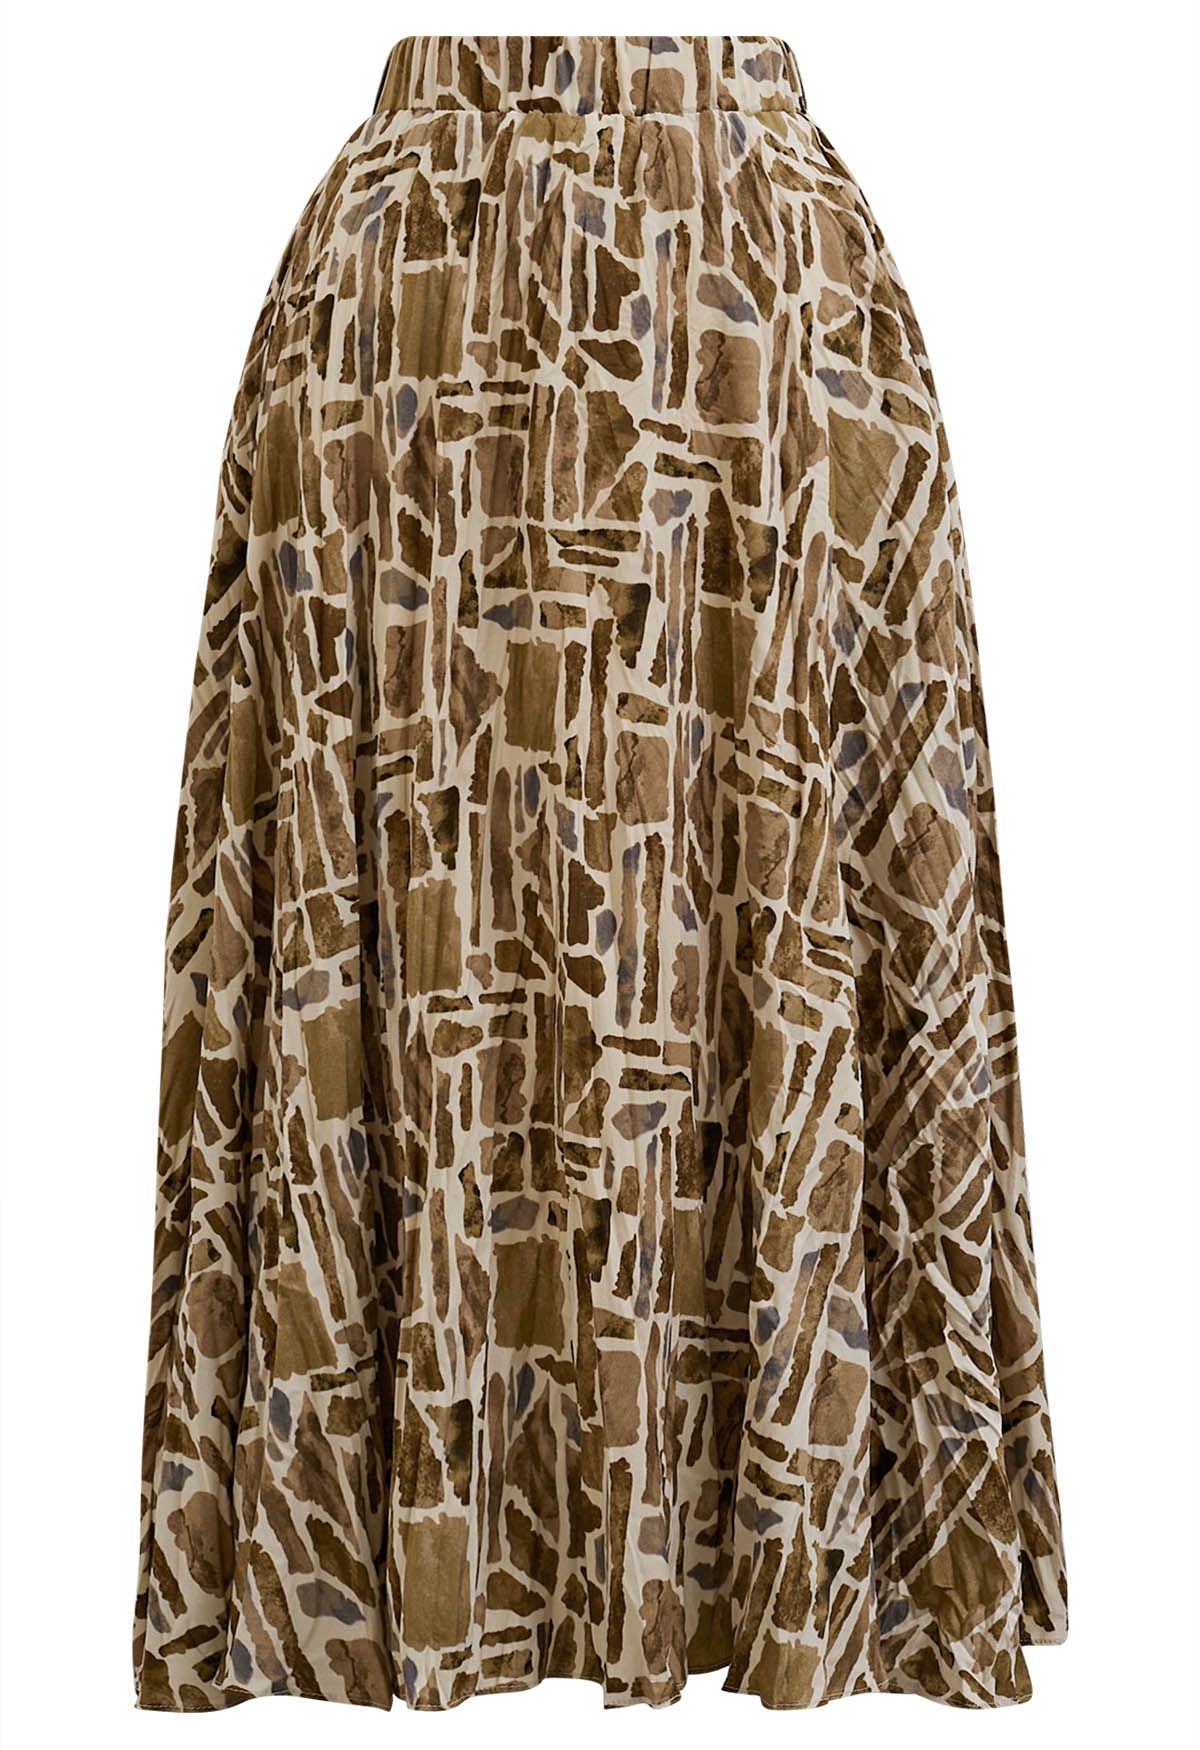 Graphic Printed Midi Skirt in Camel